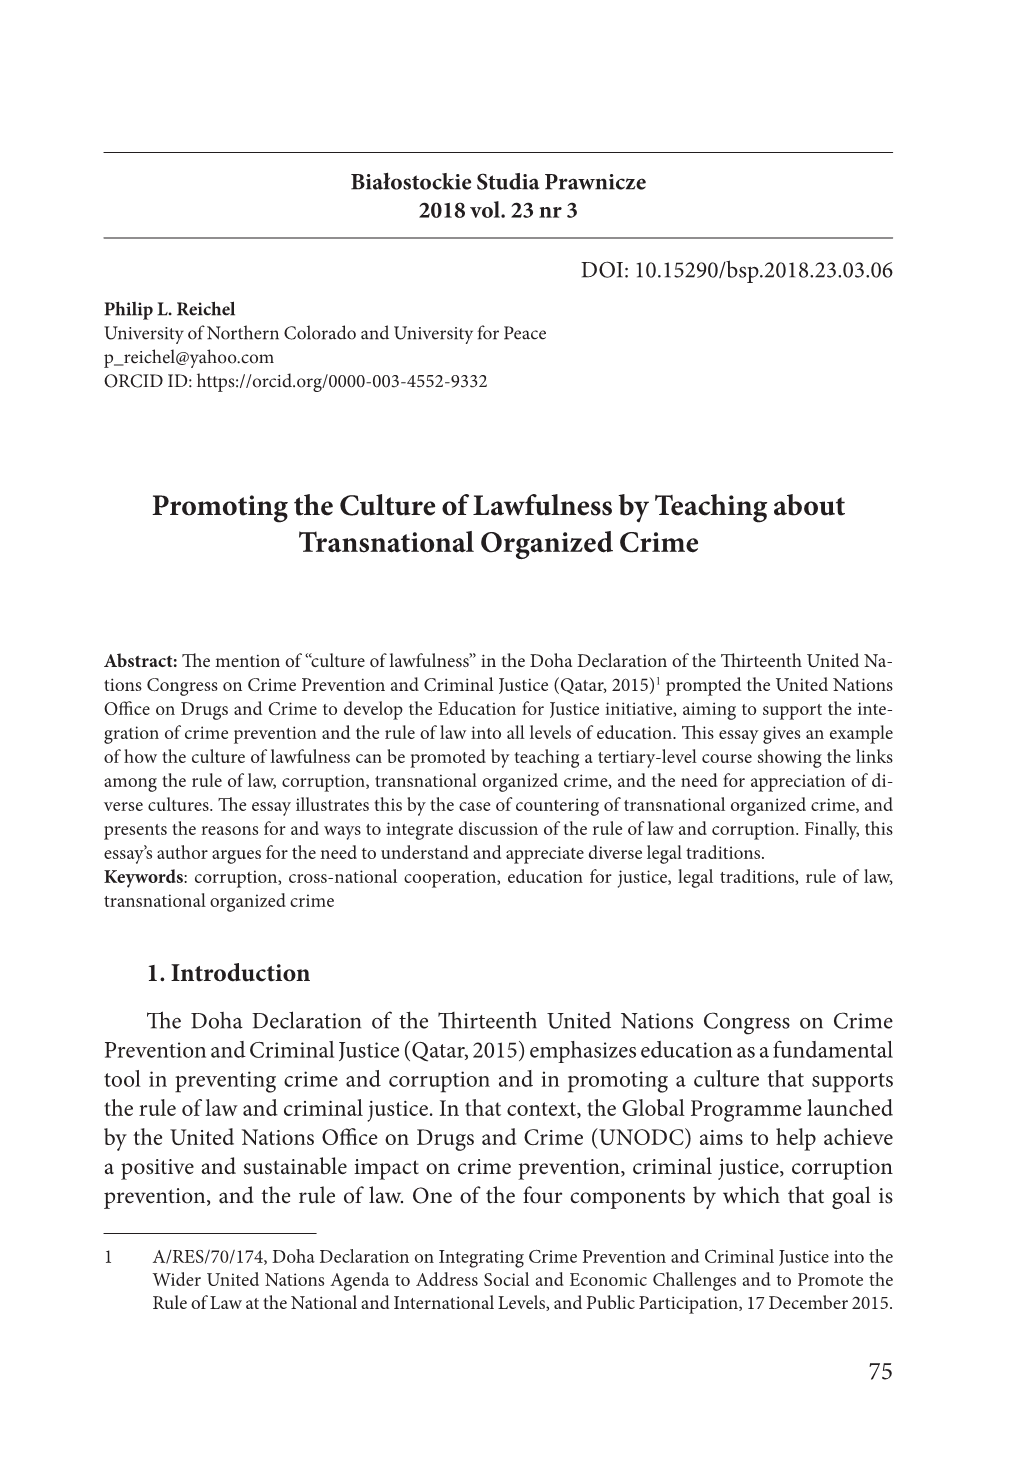 Promoting the Culture of Lawfulness by Teaching About Transnational Organized Crime